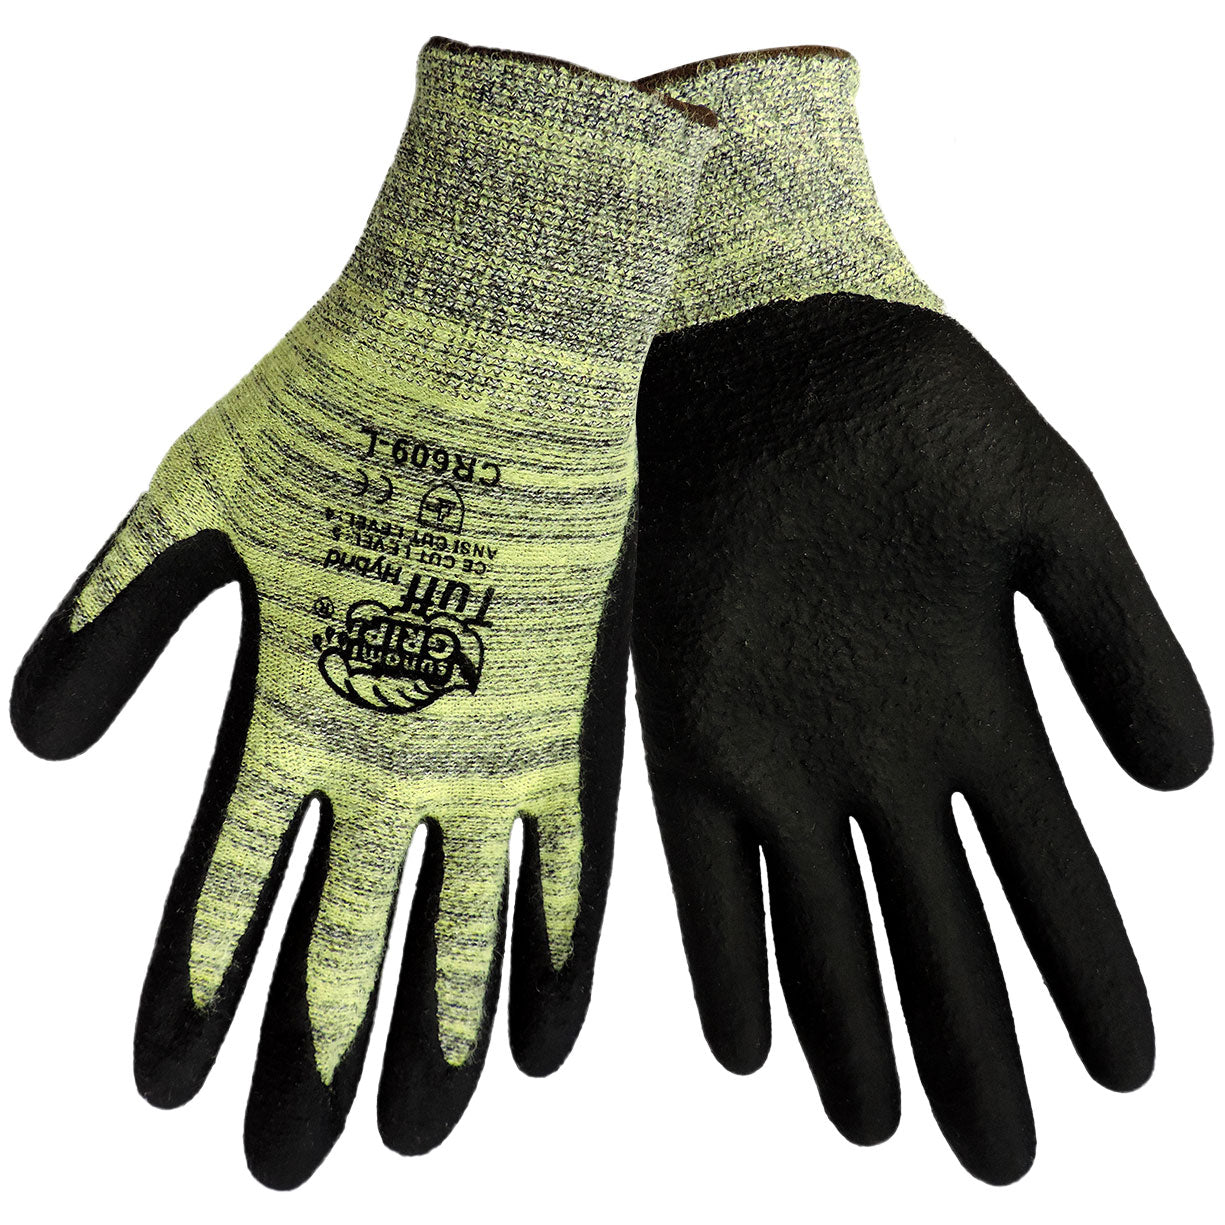 Best Gloves For Steele And Metal Fabrication –